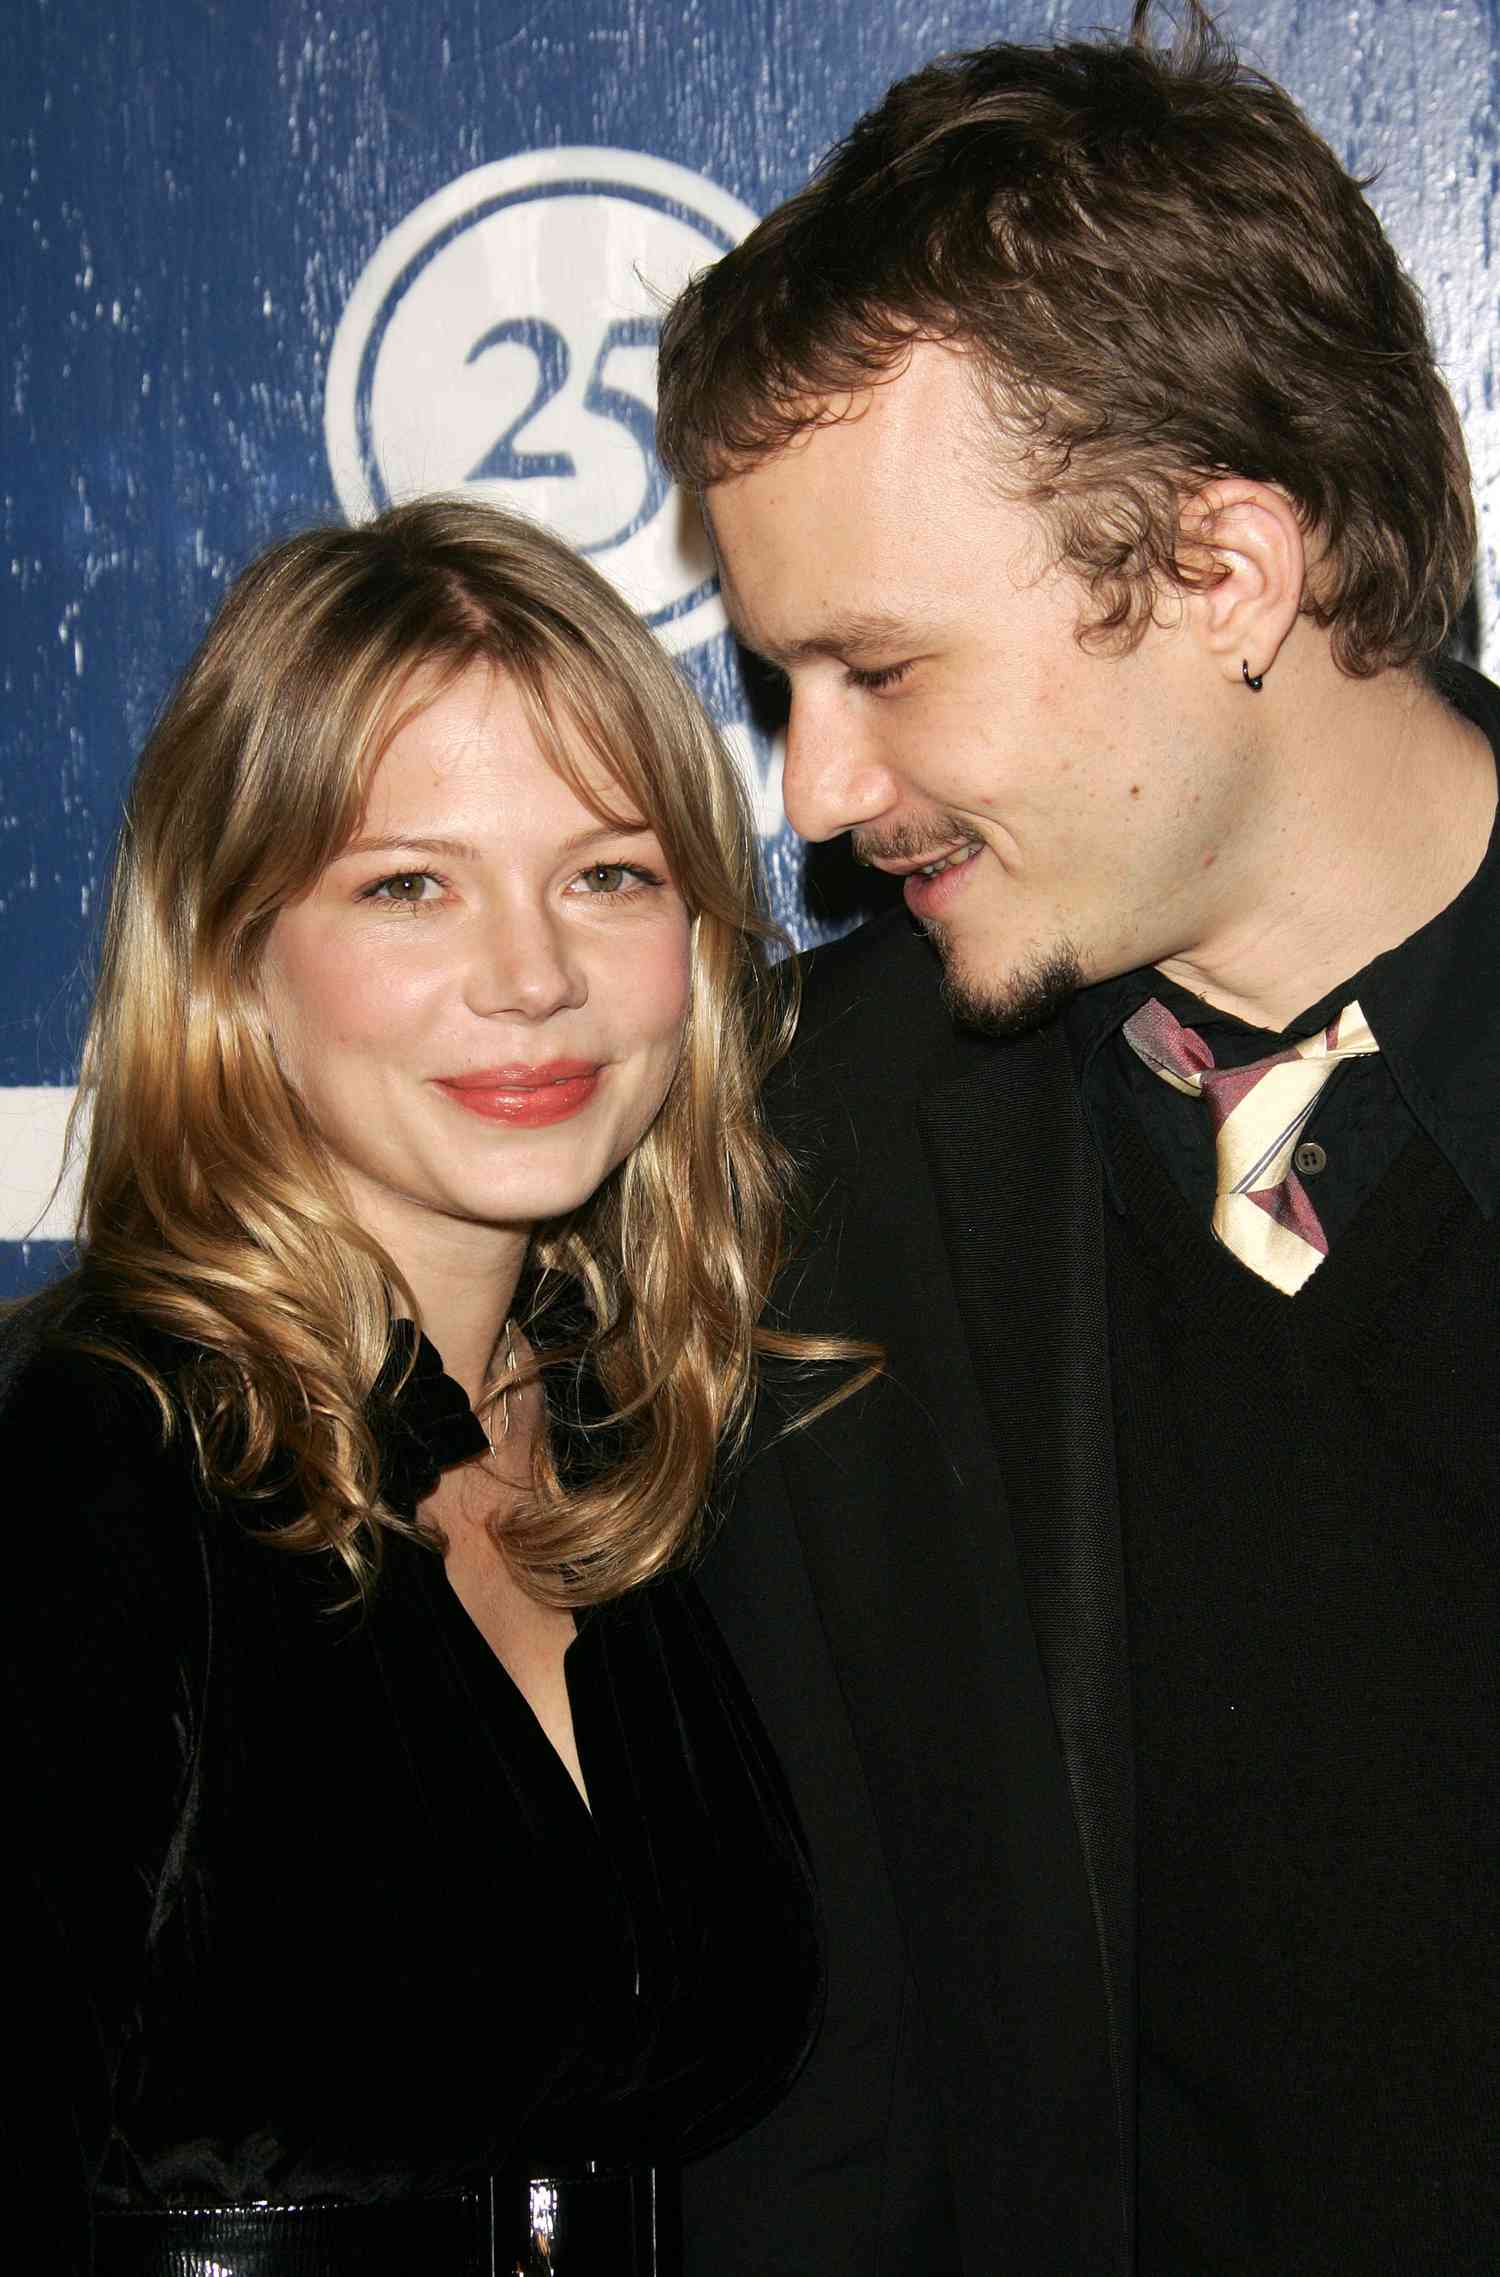 Michelle Williams Secretly Married A Decade After Heath Ledger's Death